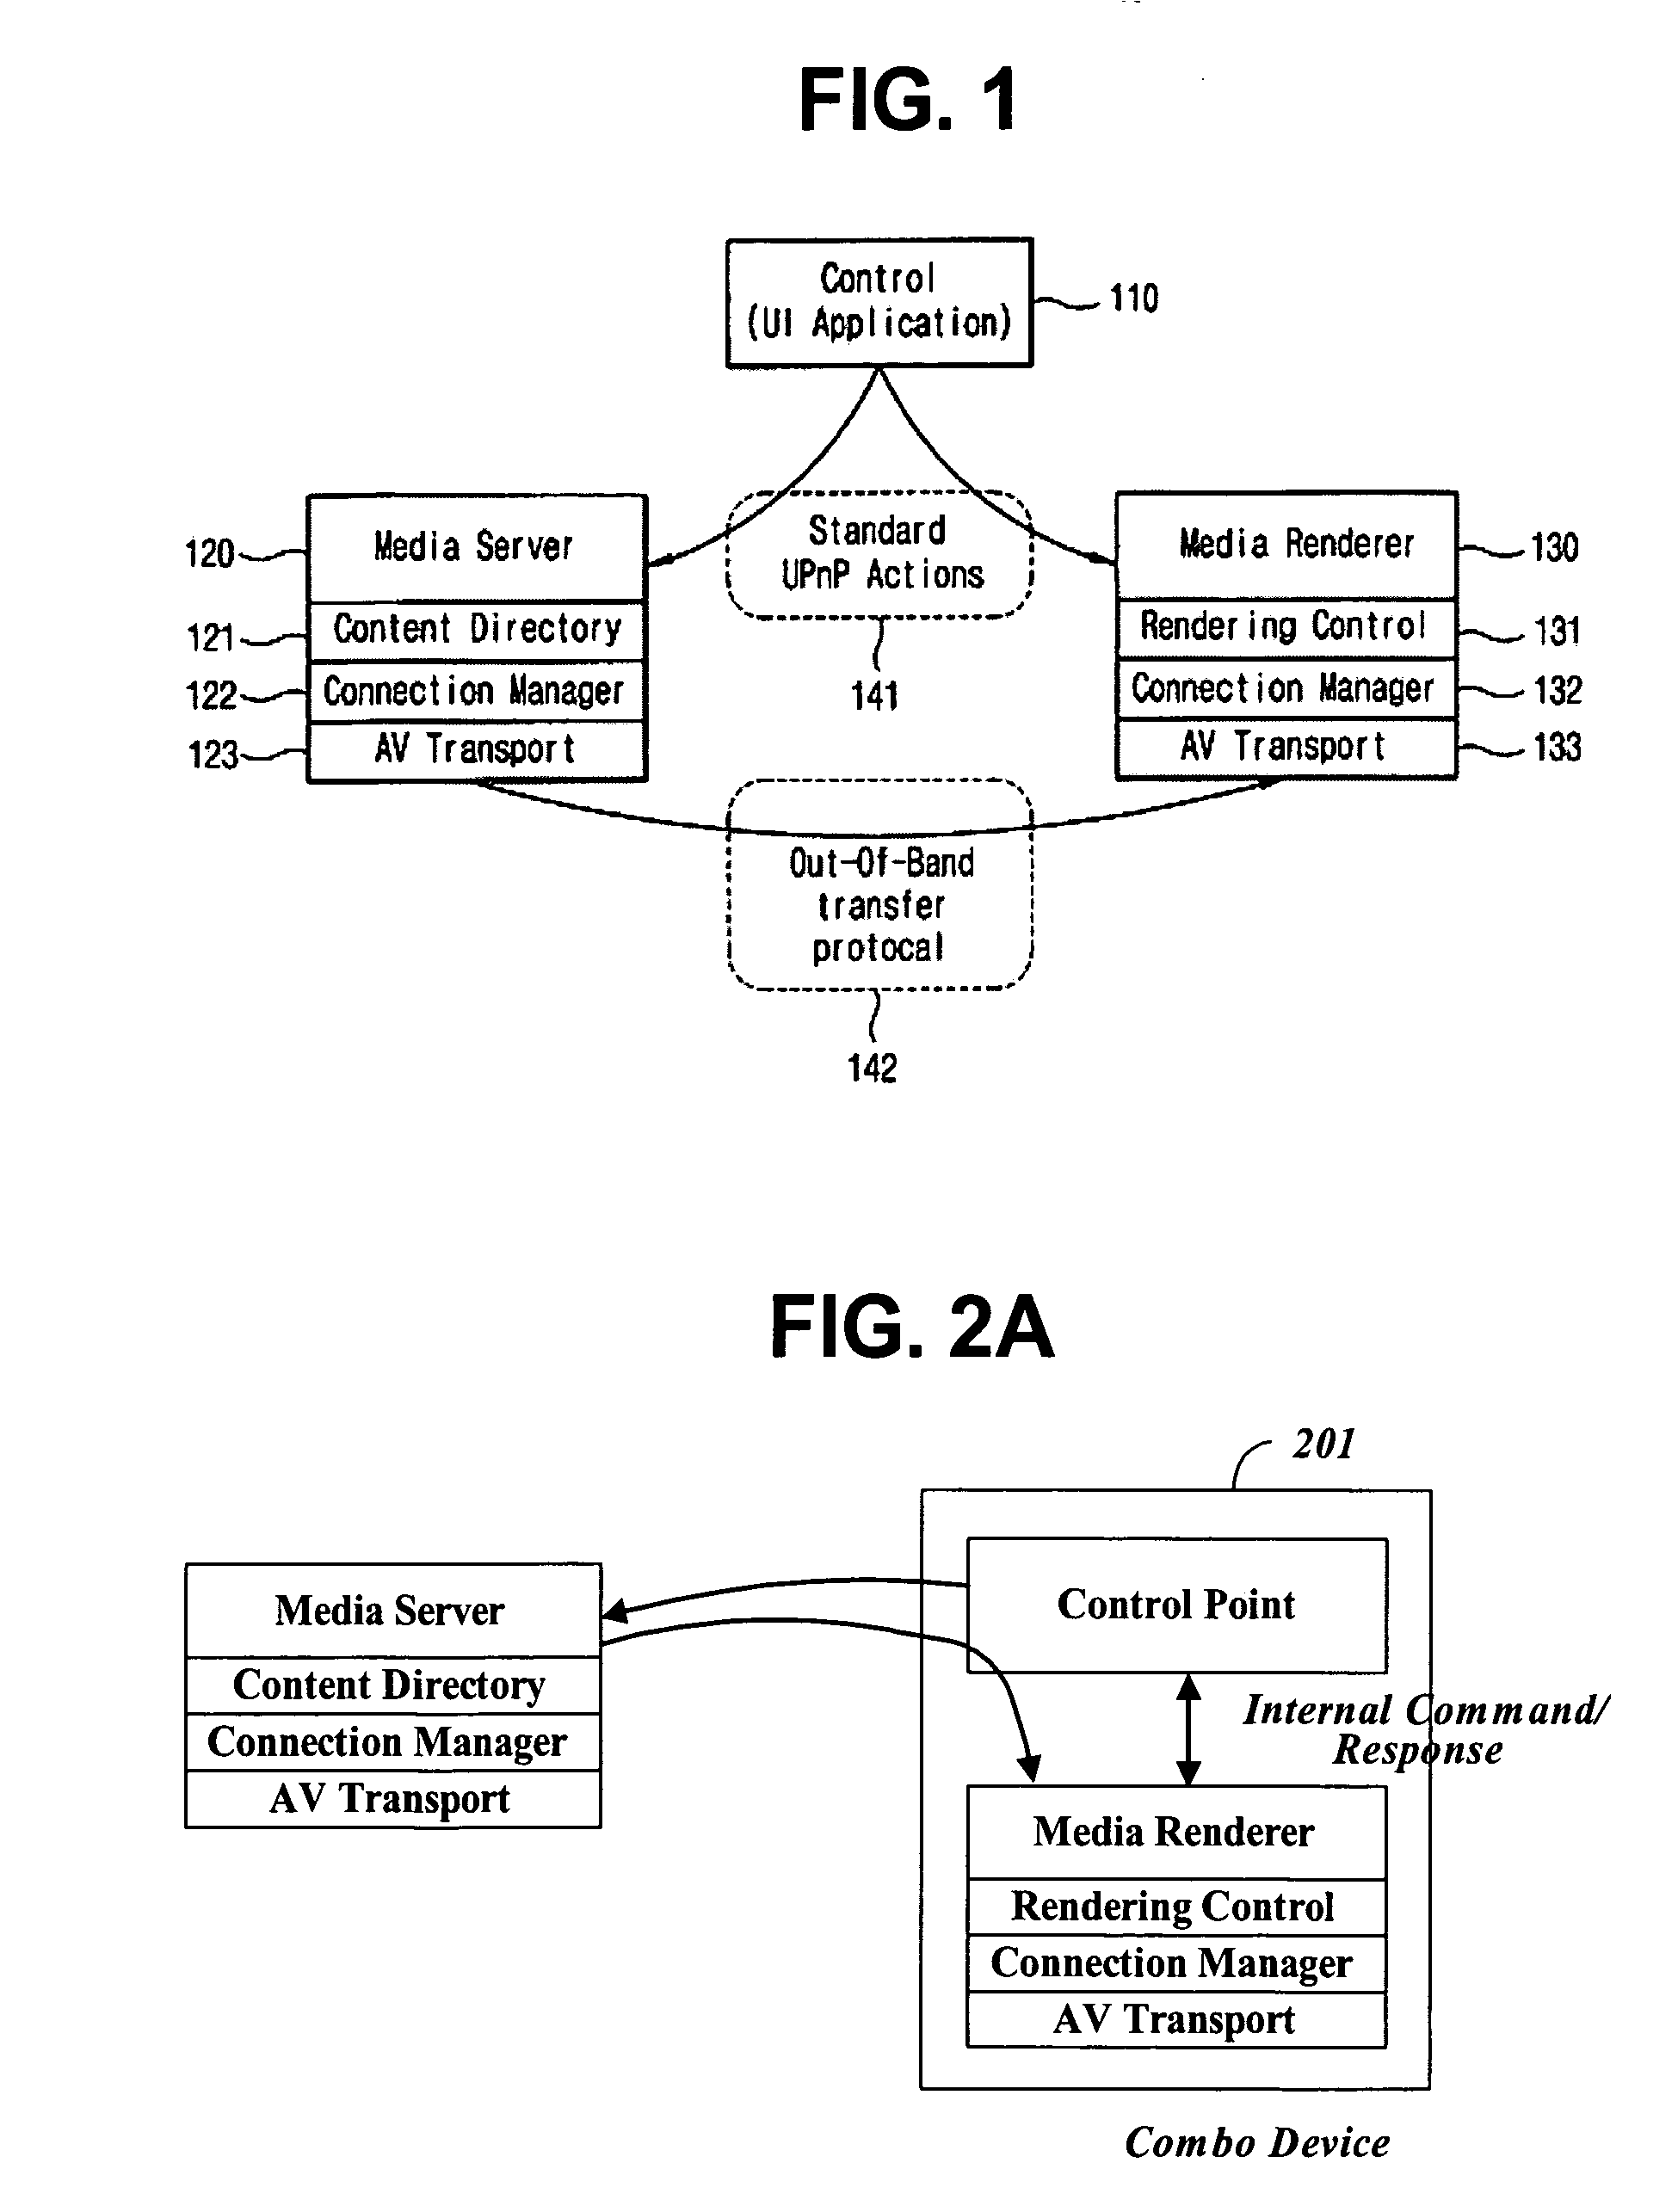 Supporting device information of a combo device in a universal plug and play network